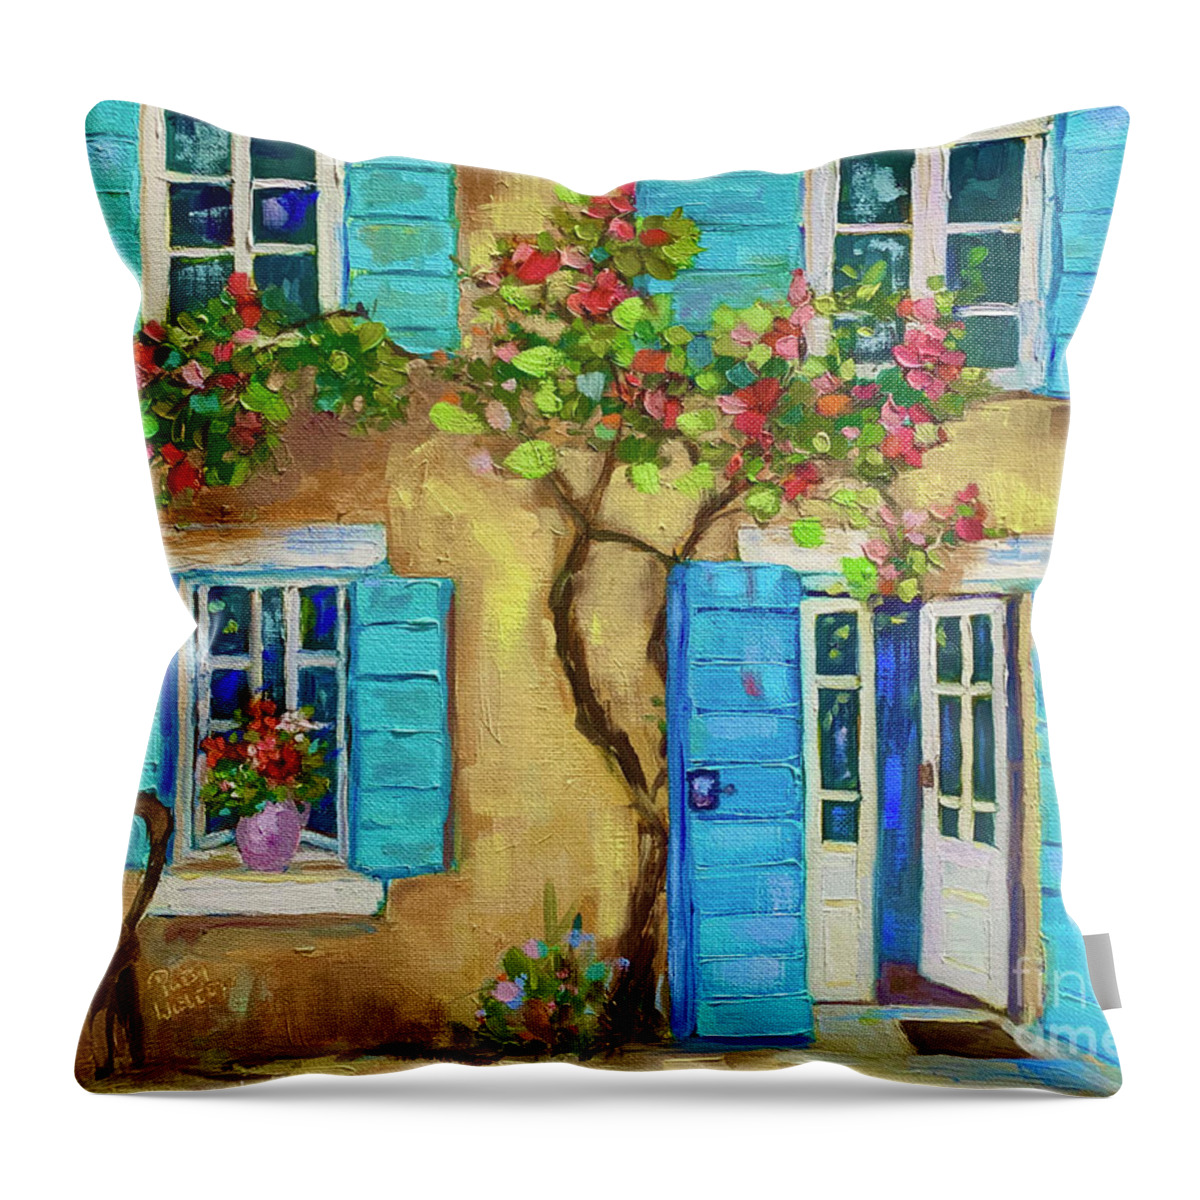 French Door Throw Pillow featuring the painting Entrez Vous by Patsy Walton